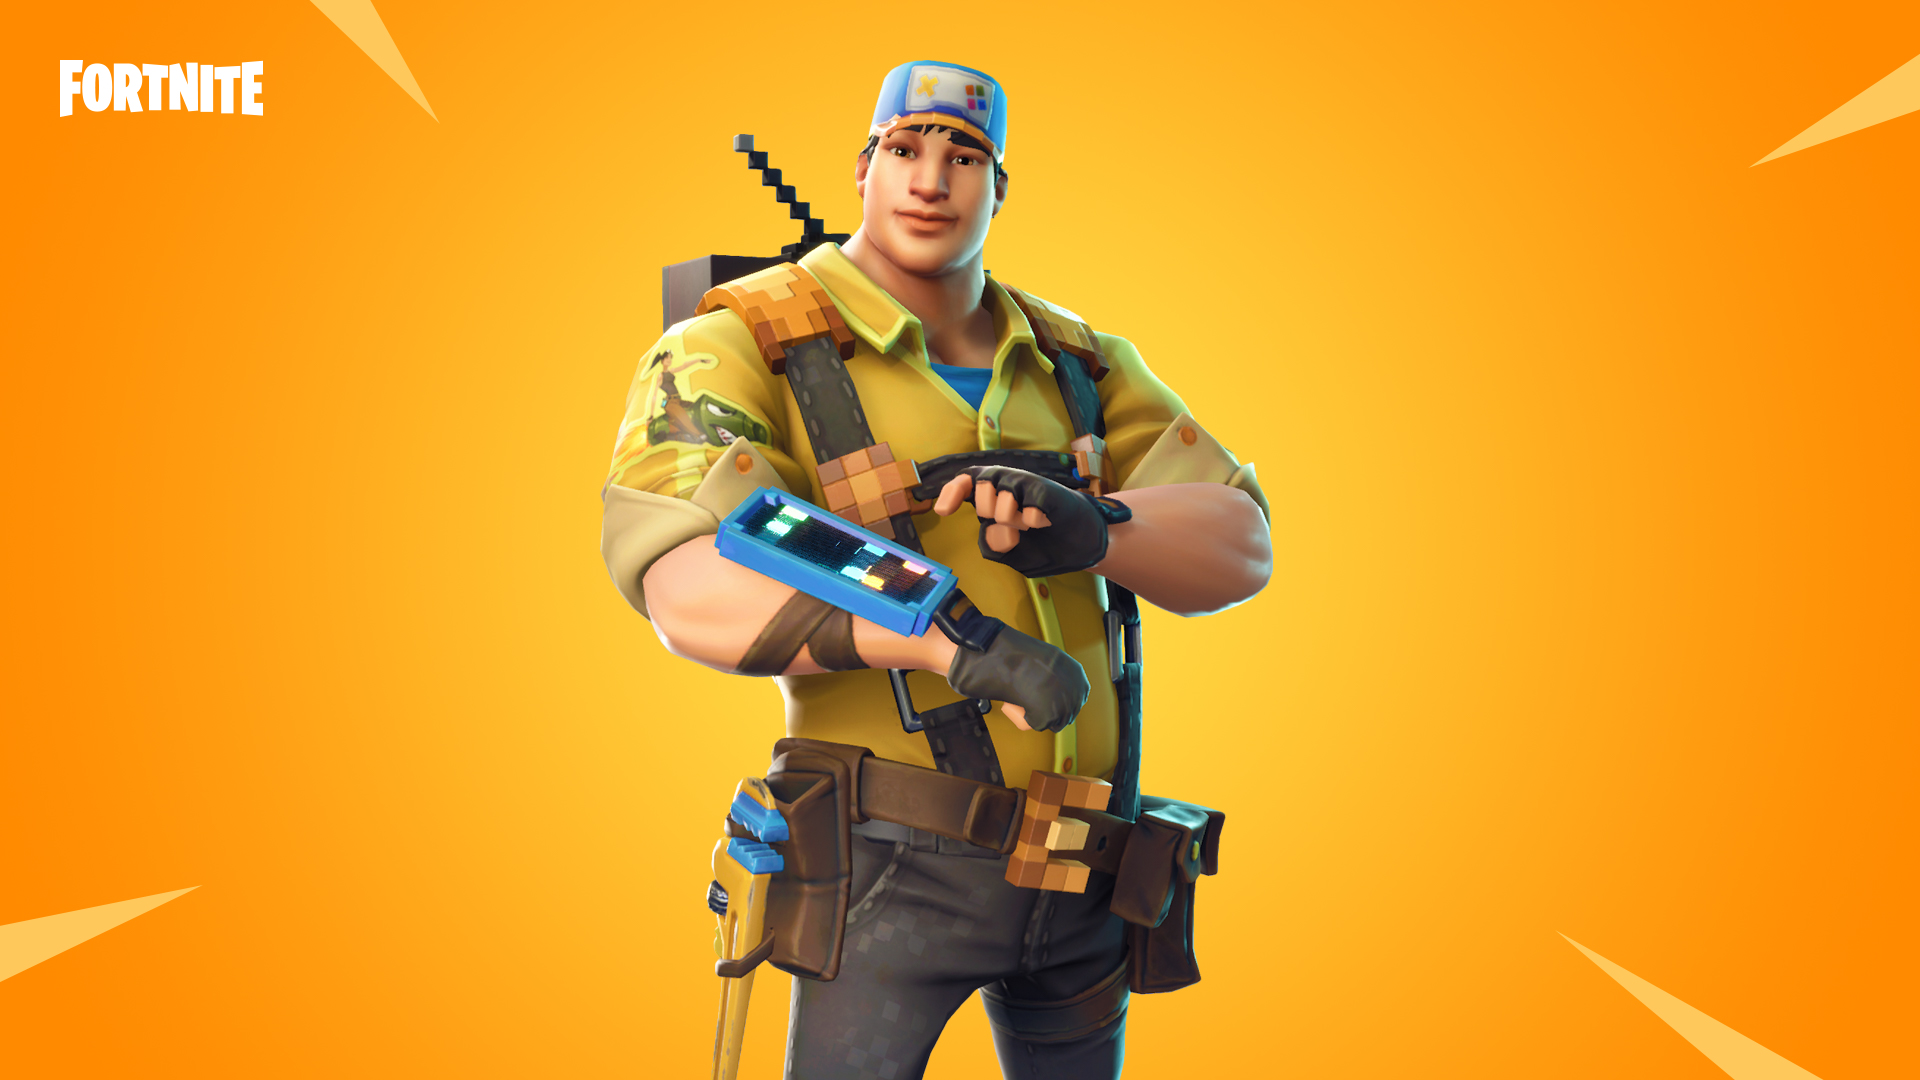 Fortnite%2Fpatch-notes%2Fv4-4-content-update%2FStW04_Social_8-Bit-1920x1080-92fee3c1da0a63993e72f191c2b0710247a45c2d.jpg